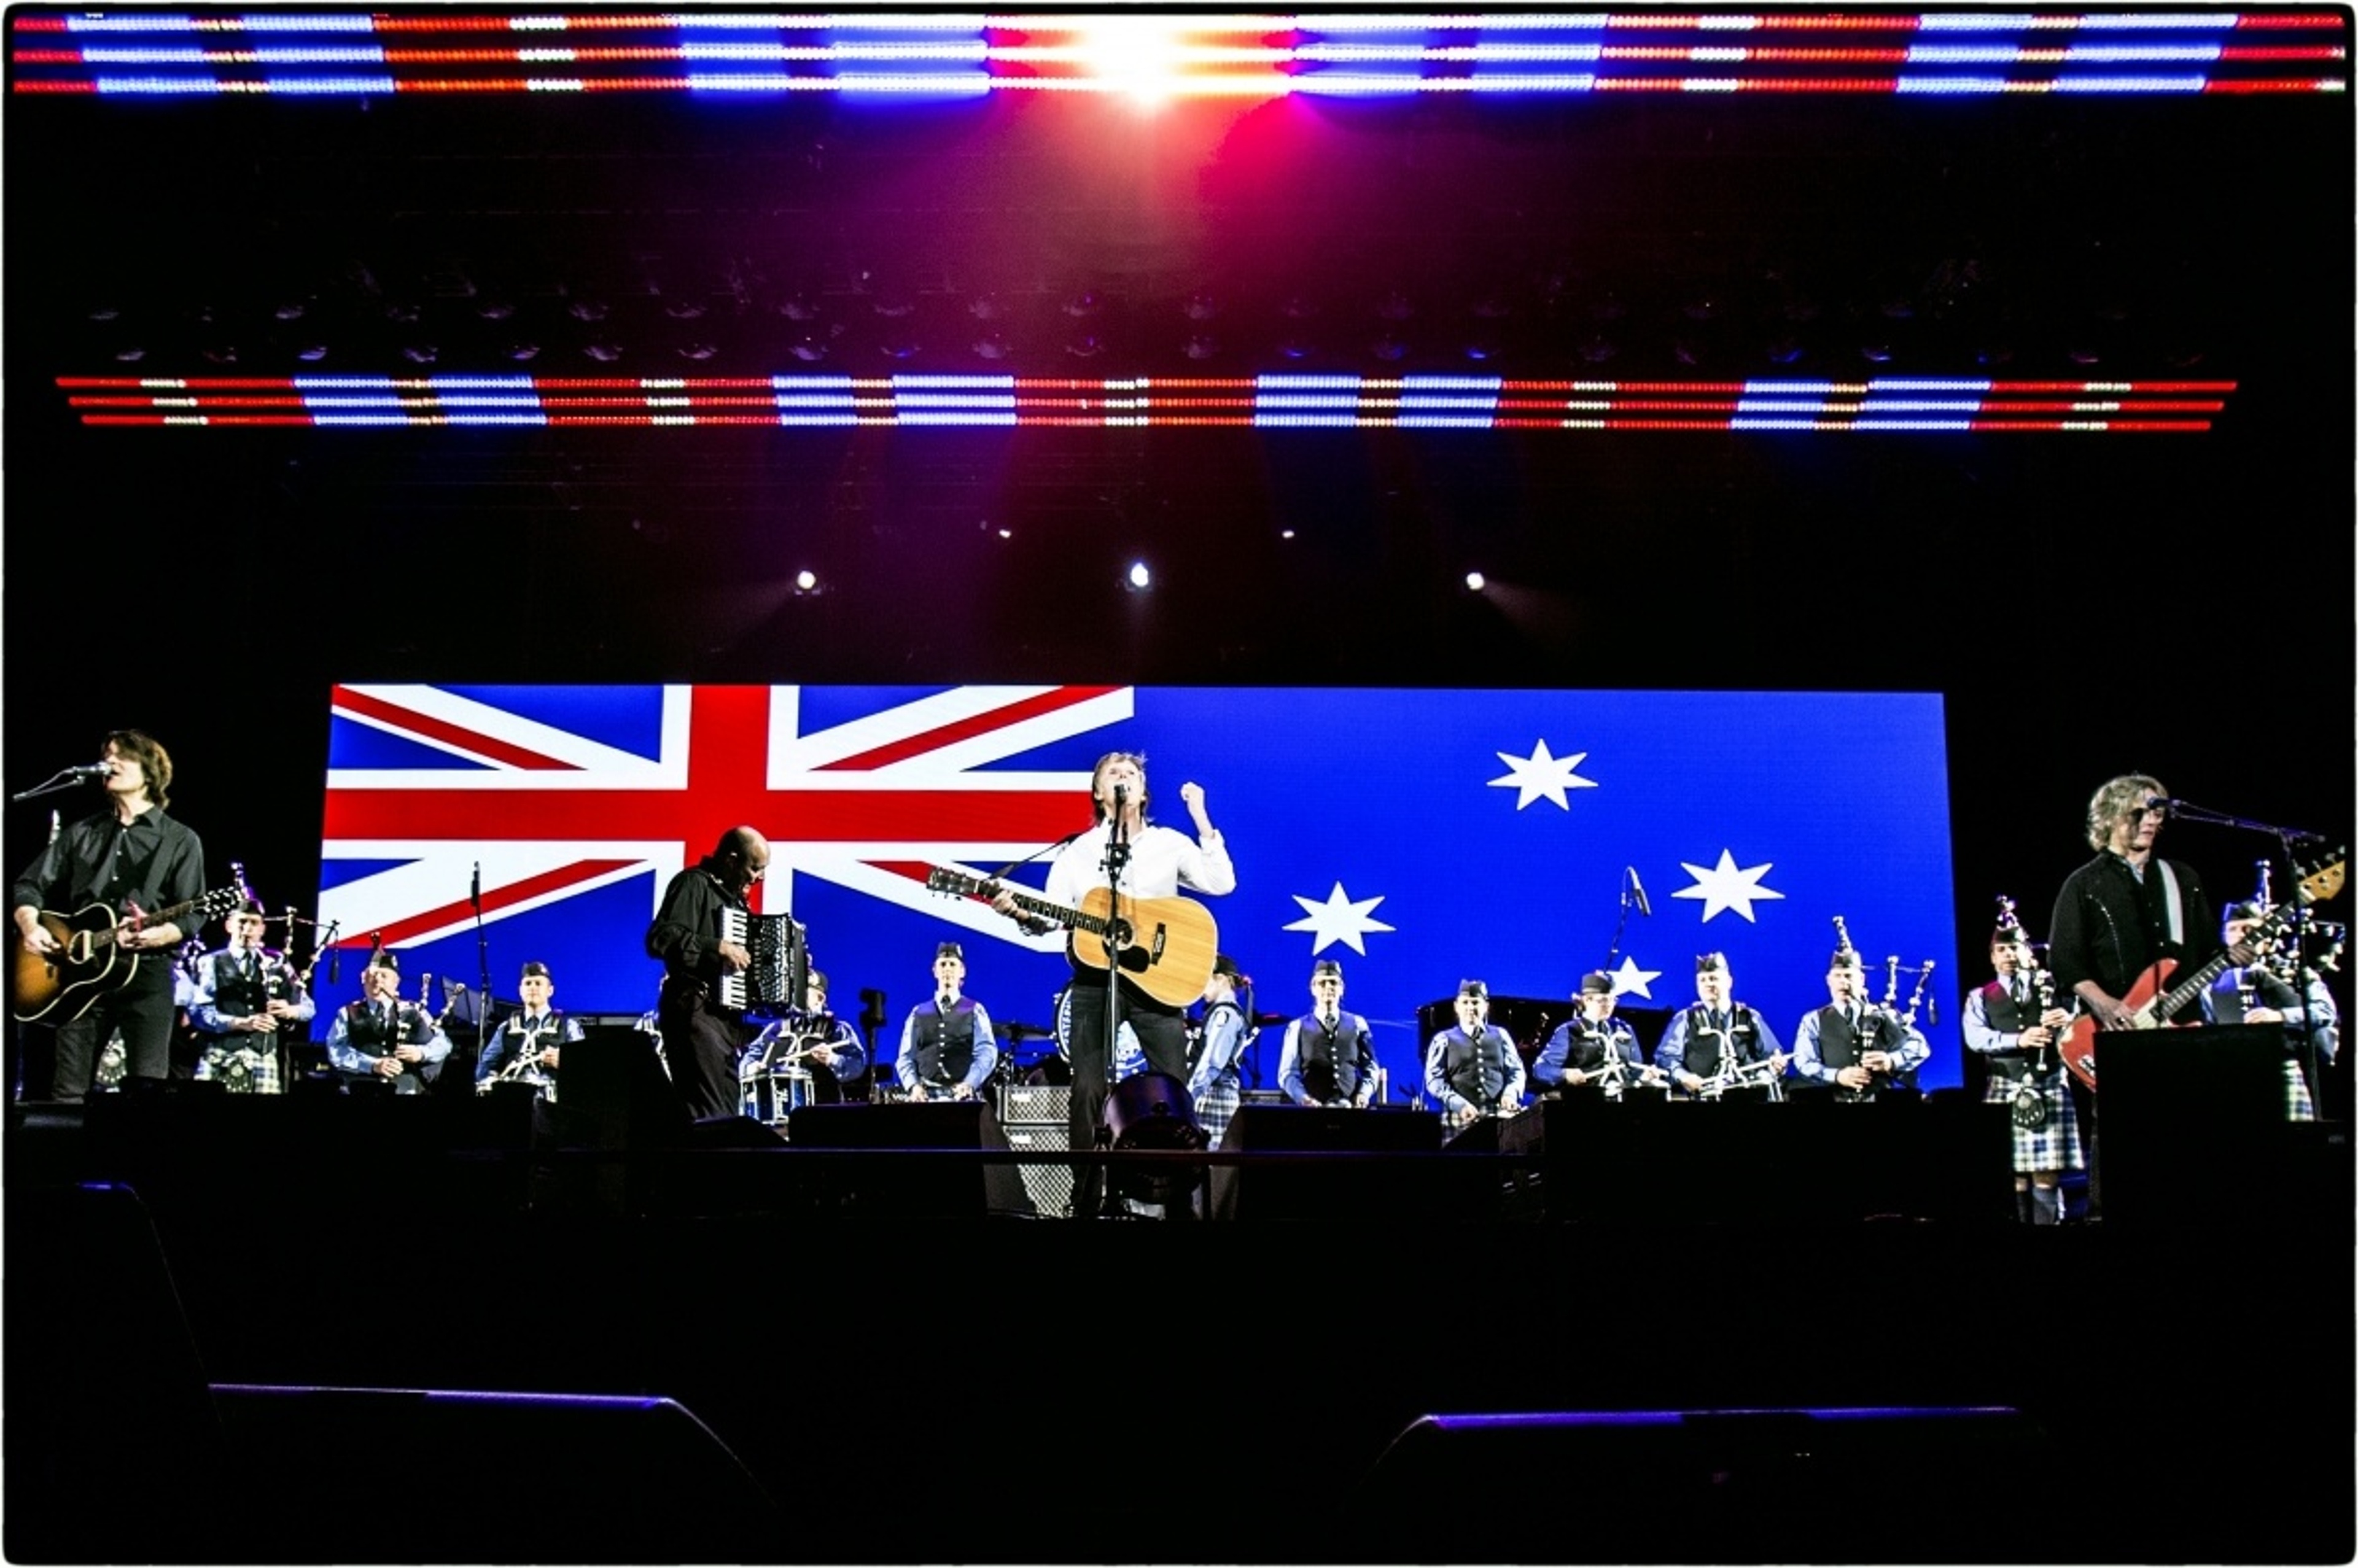 On the 2nd December Paul was accompanied on stage by the Western Australia Police Pipe Band